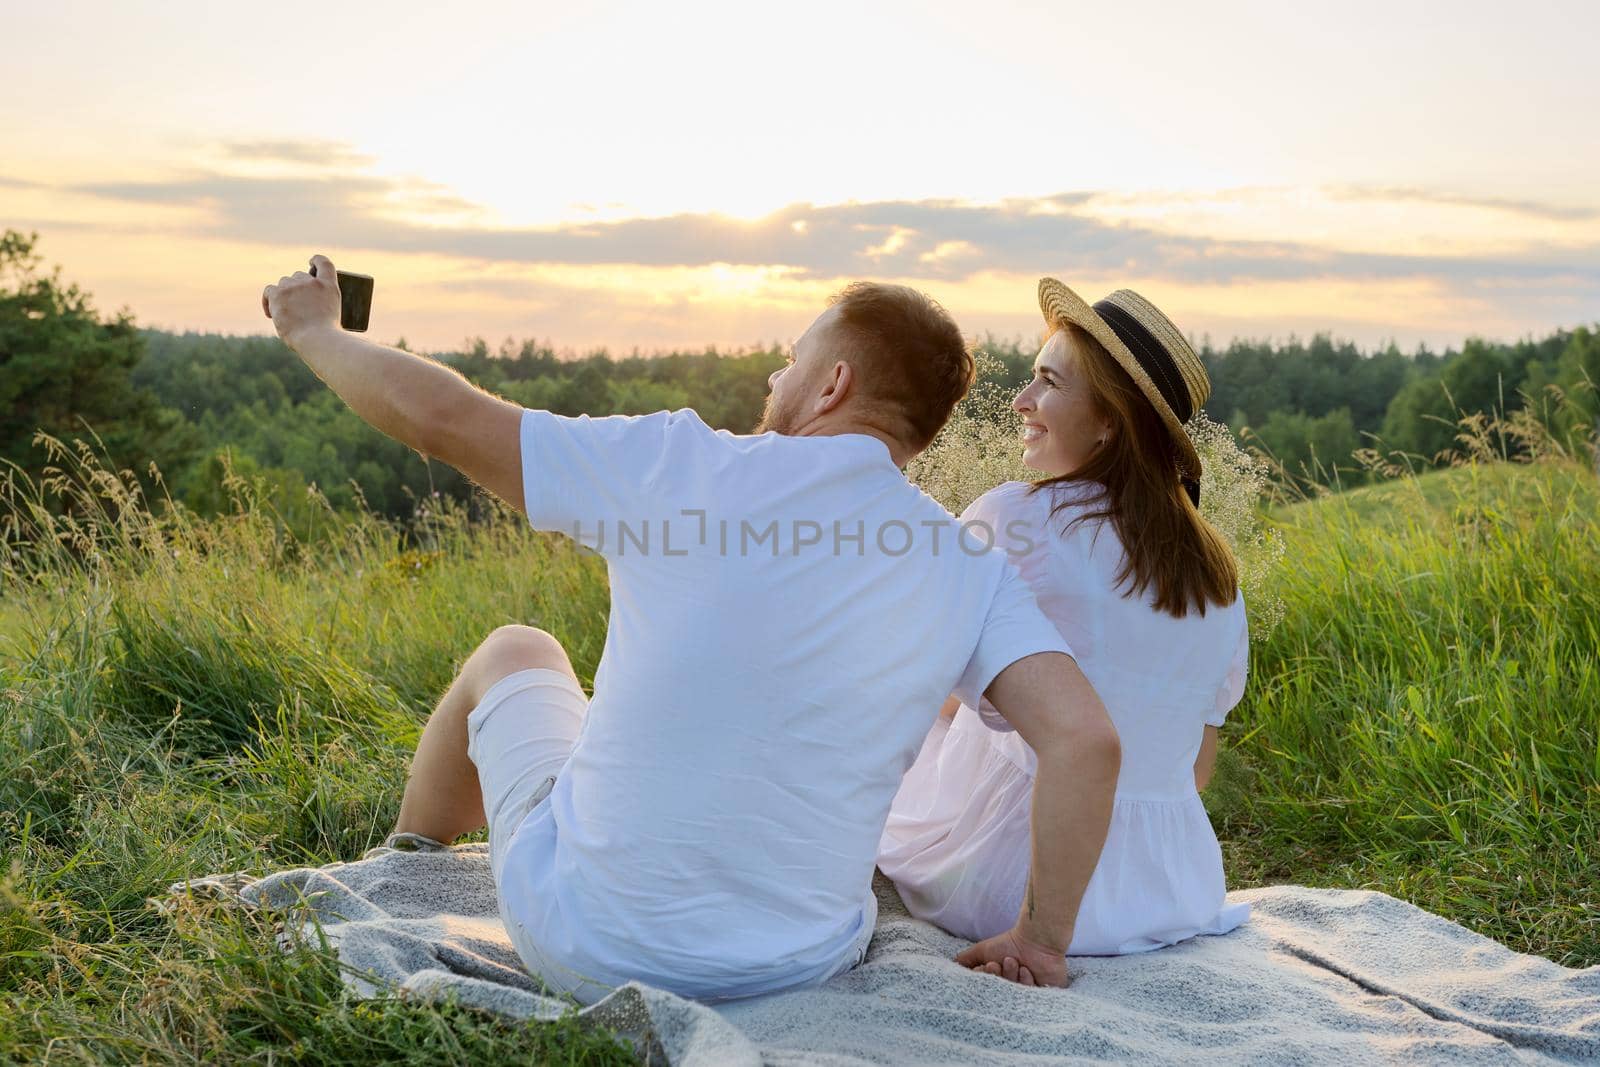 Beautiful adult couple together taking selfie photo on smartphone. Happy man and woman sitting on grass outdoors in sunset sunlight. Relationships, love, date, people 30s 40s age